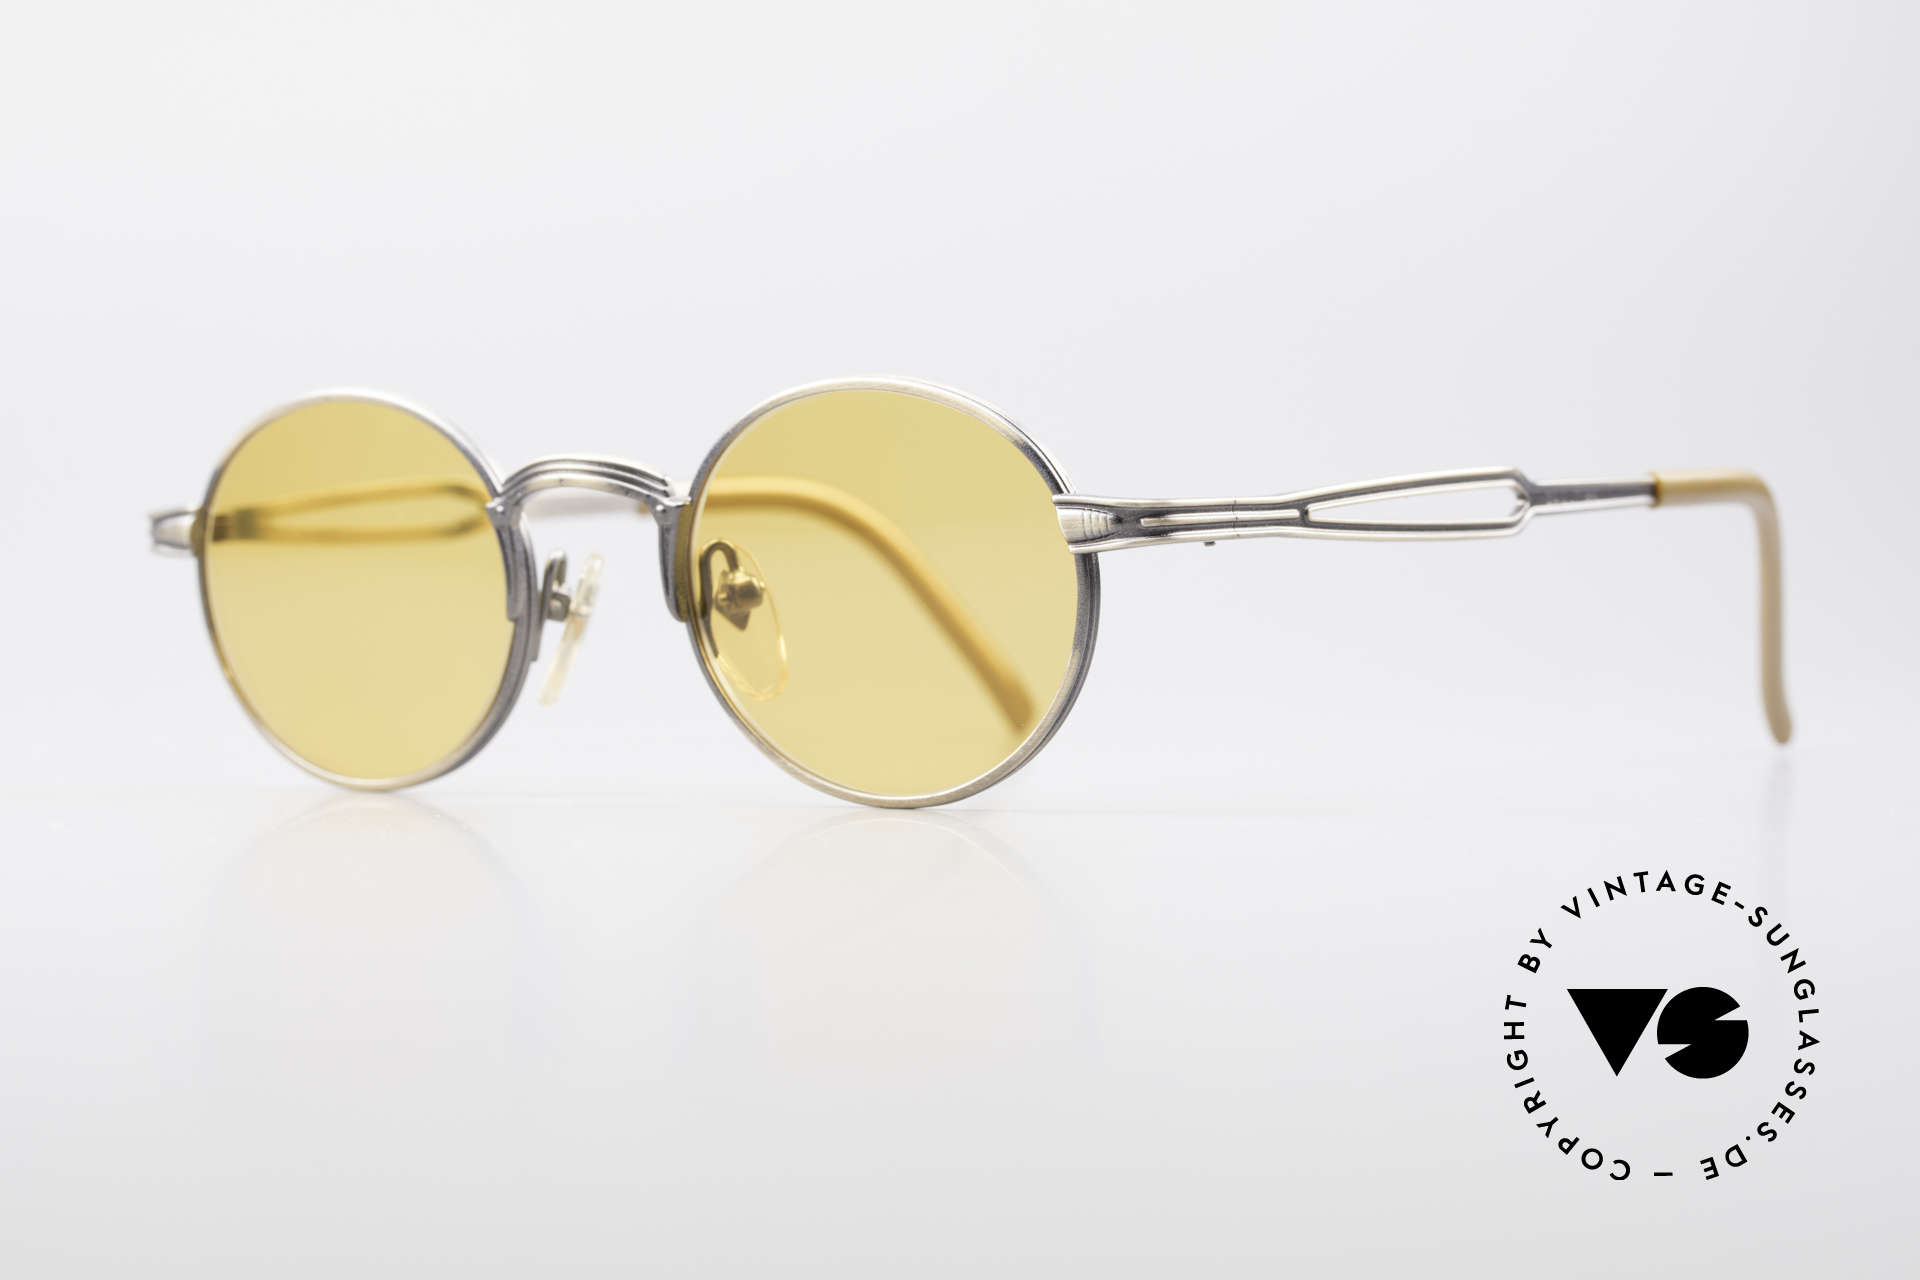 Jean Paul Gaultier 55-7107 Round Vintage Sunglasses, fancy orange sun lenses (also wearable at night), Made for Men and Women